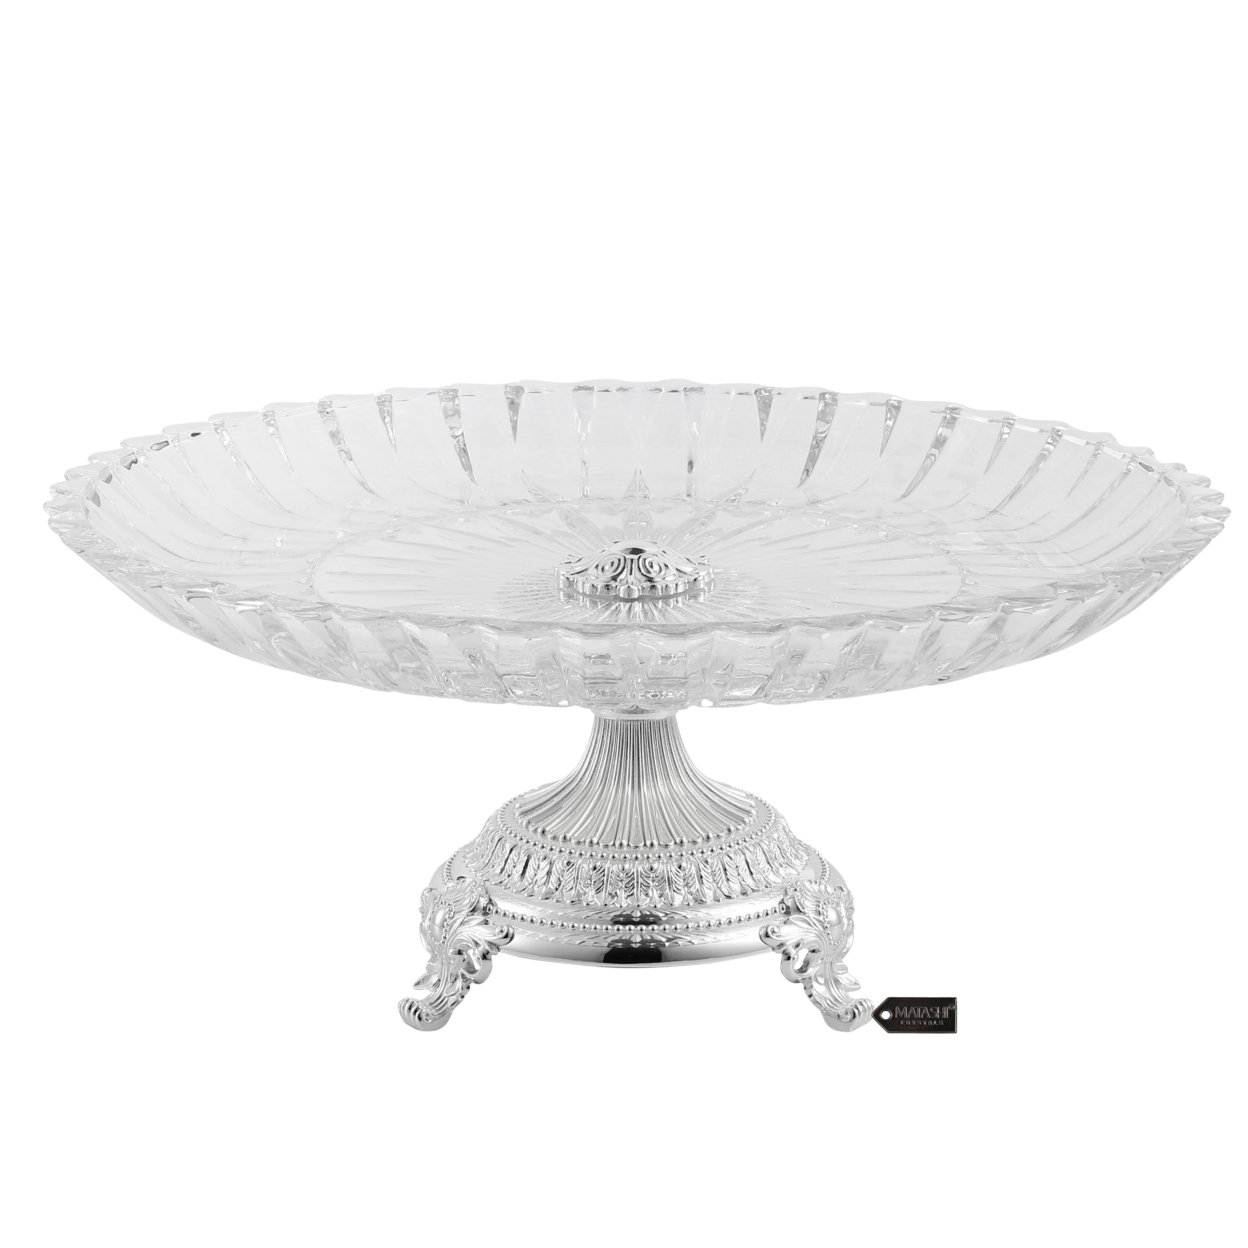 Matashi Cake Plate Centerpiece Decorative Dish, Round Serving Platter W/ Silver Plated Pedestal Base For Weddings Parties